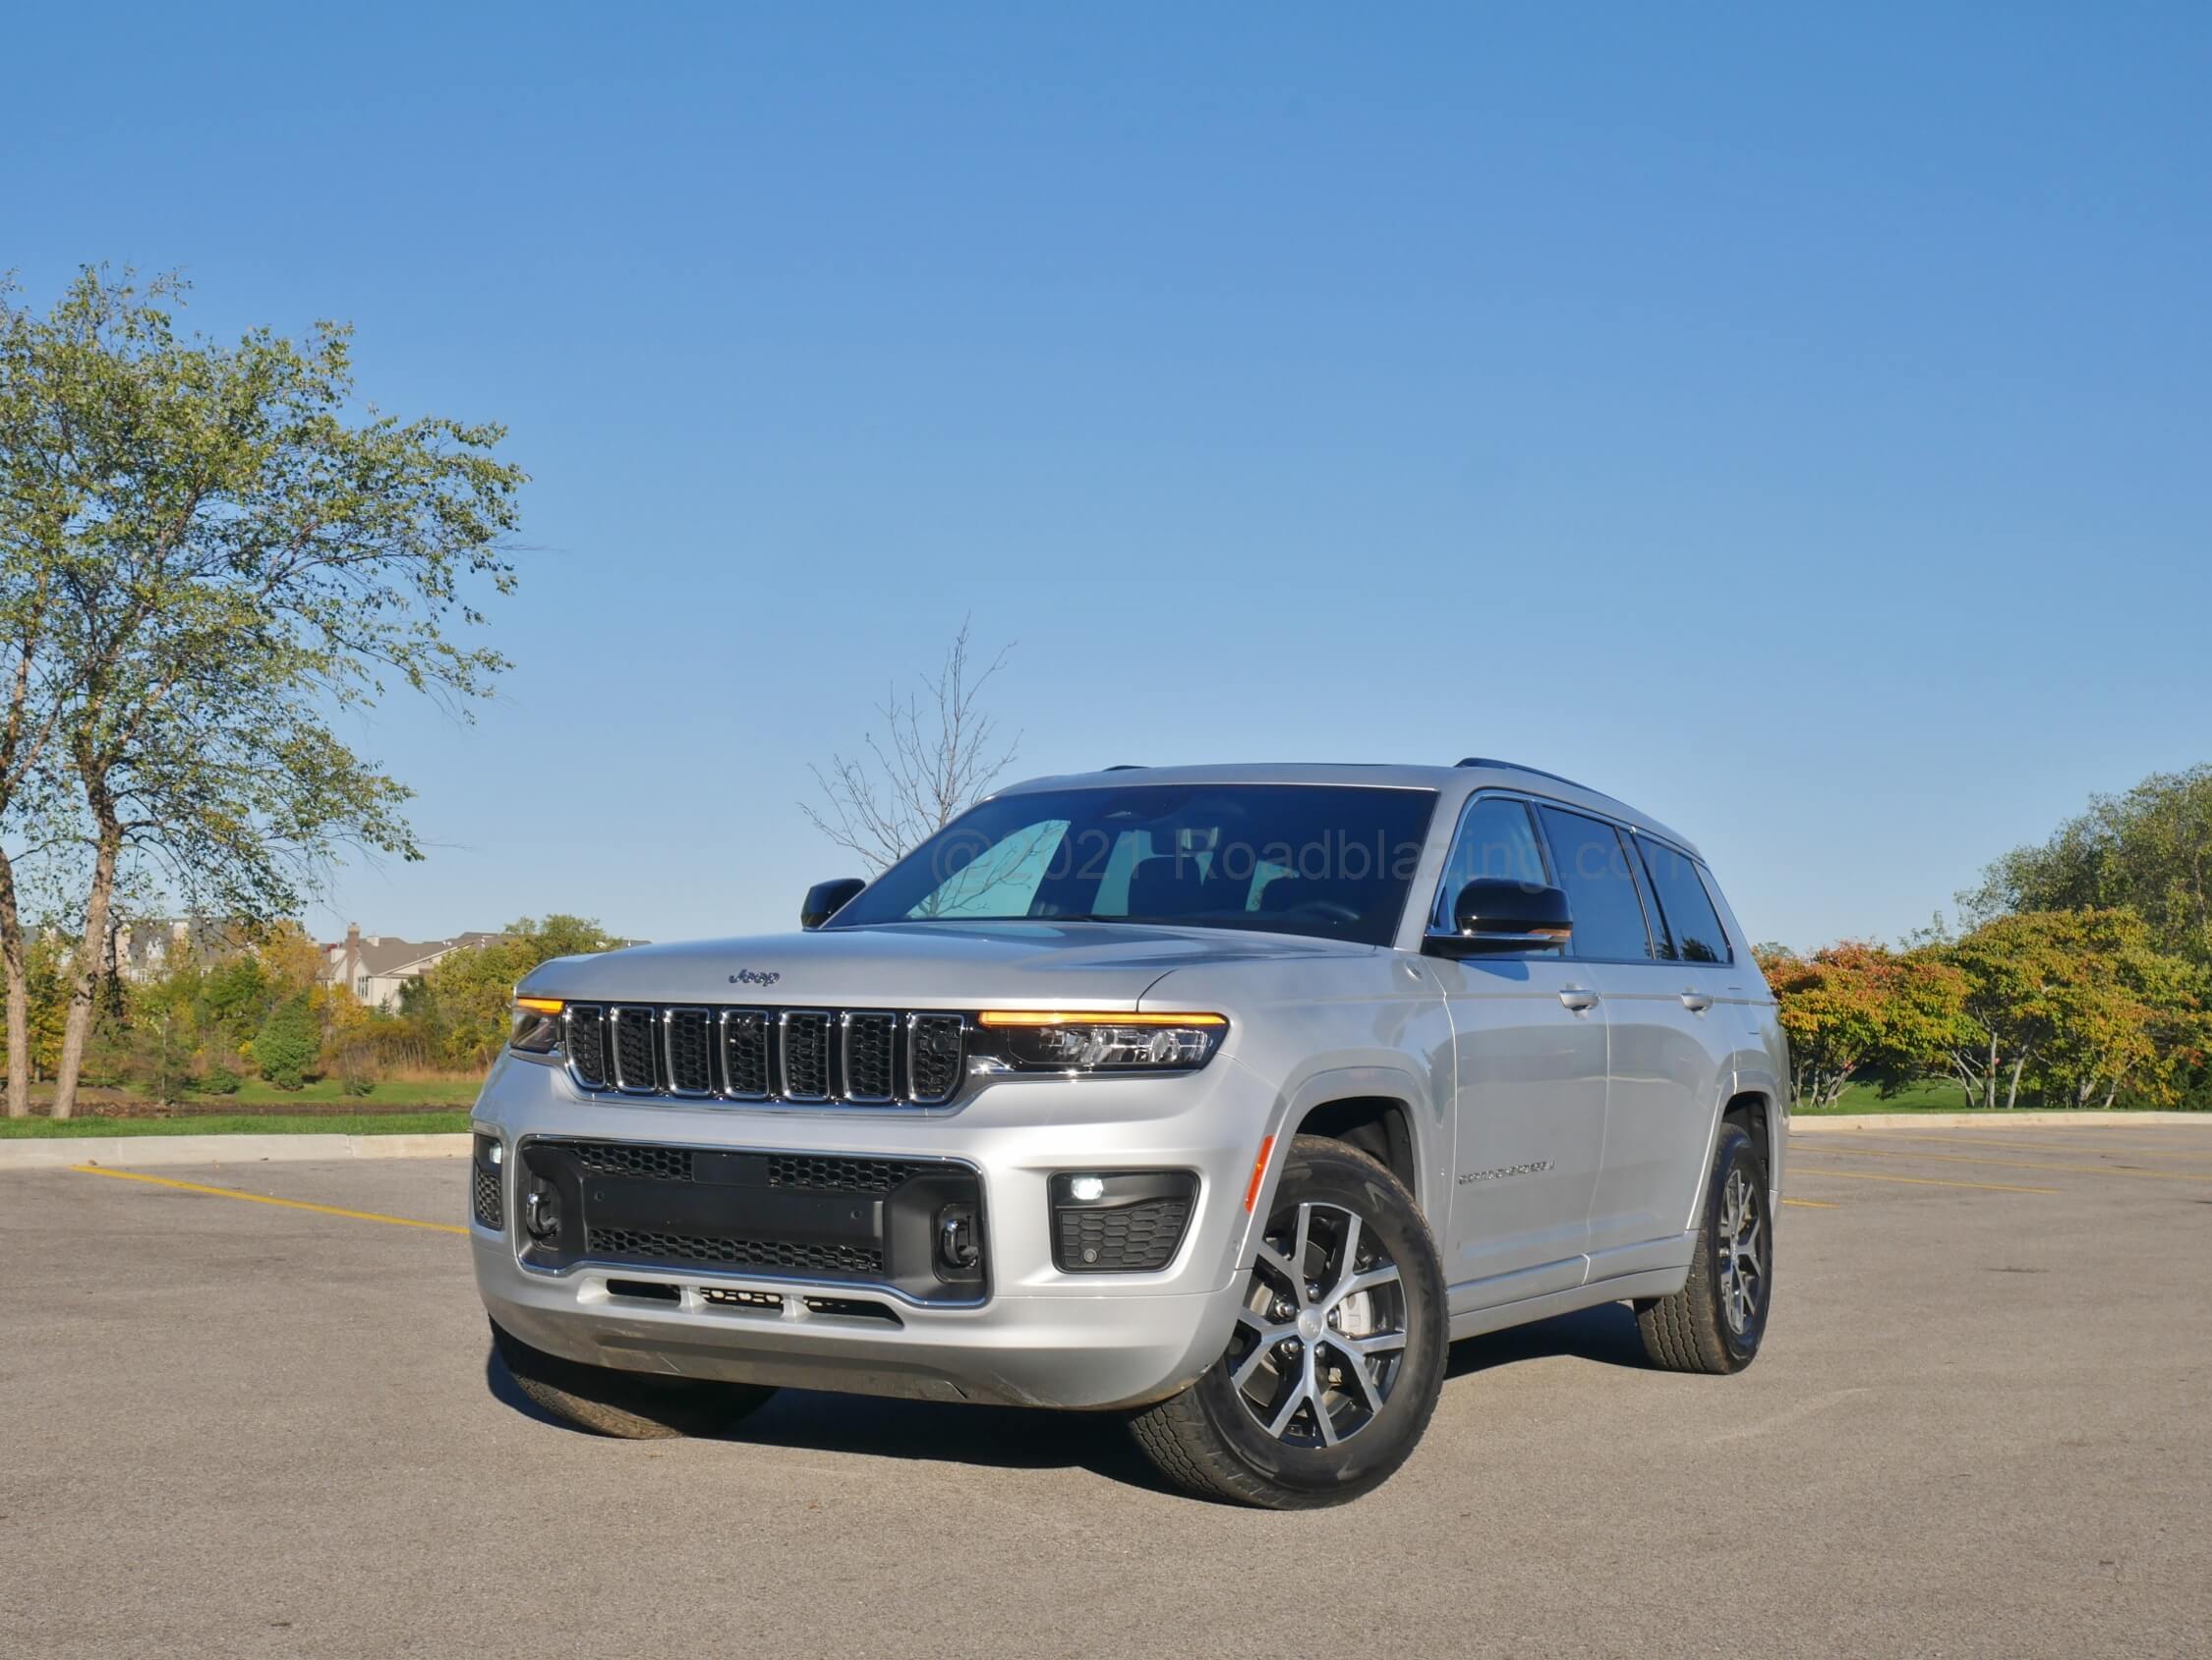 2021 Jeep Grand Cherokee L Overland 5.7L 4x4: wider, thinner trademark six vertical bar grille flows into thinner headlamp housings, emphasizing deep lower fascia